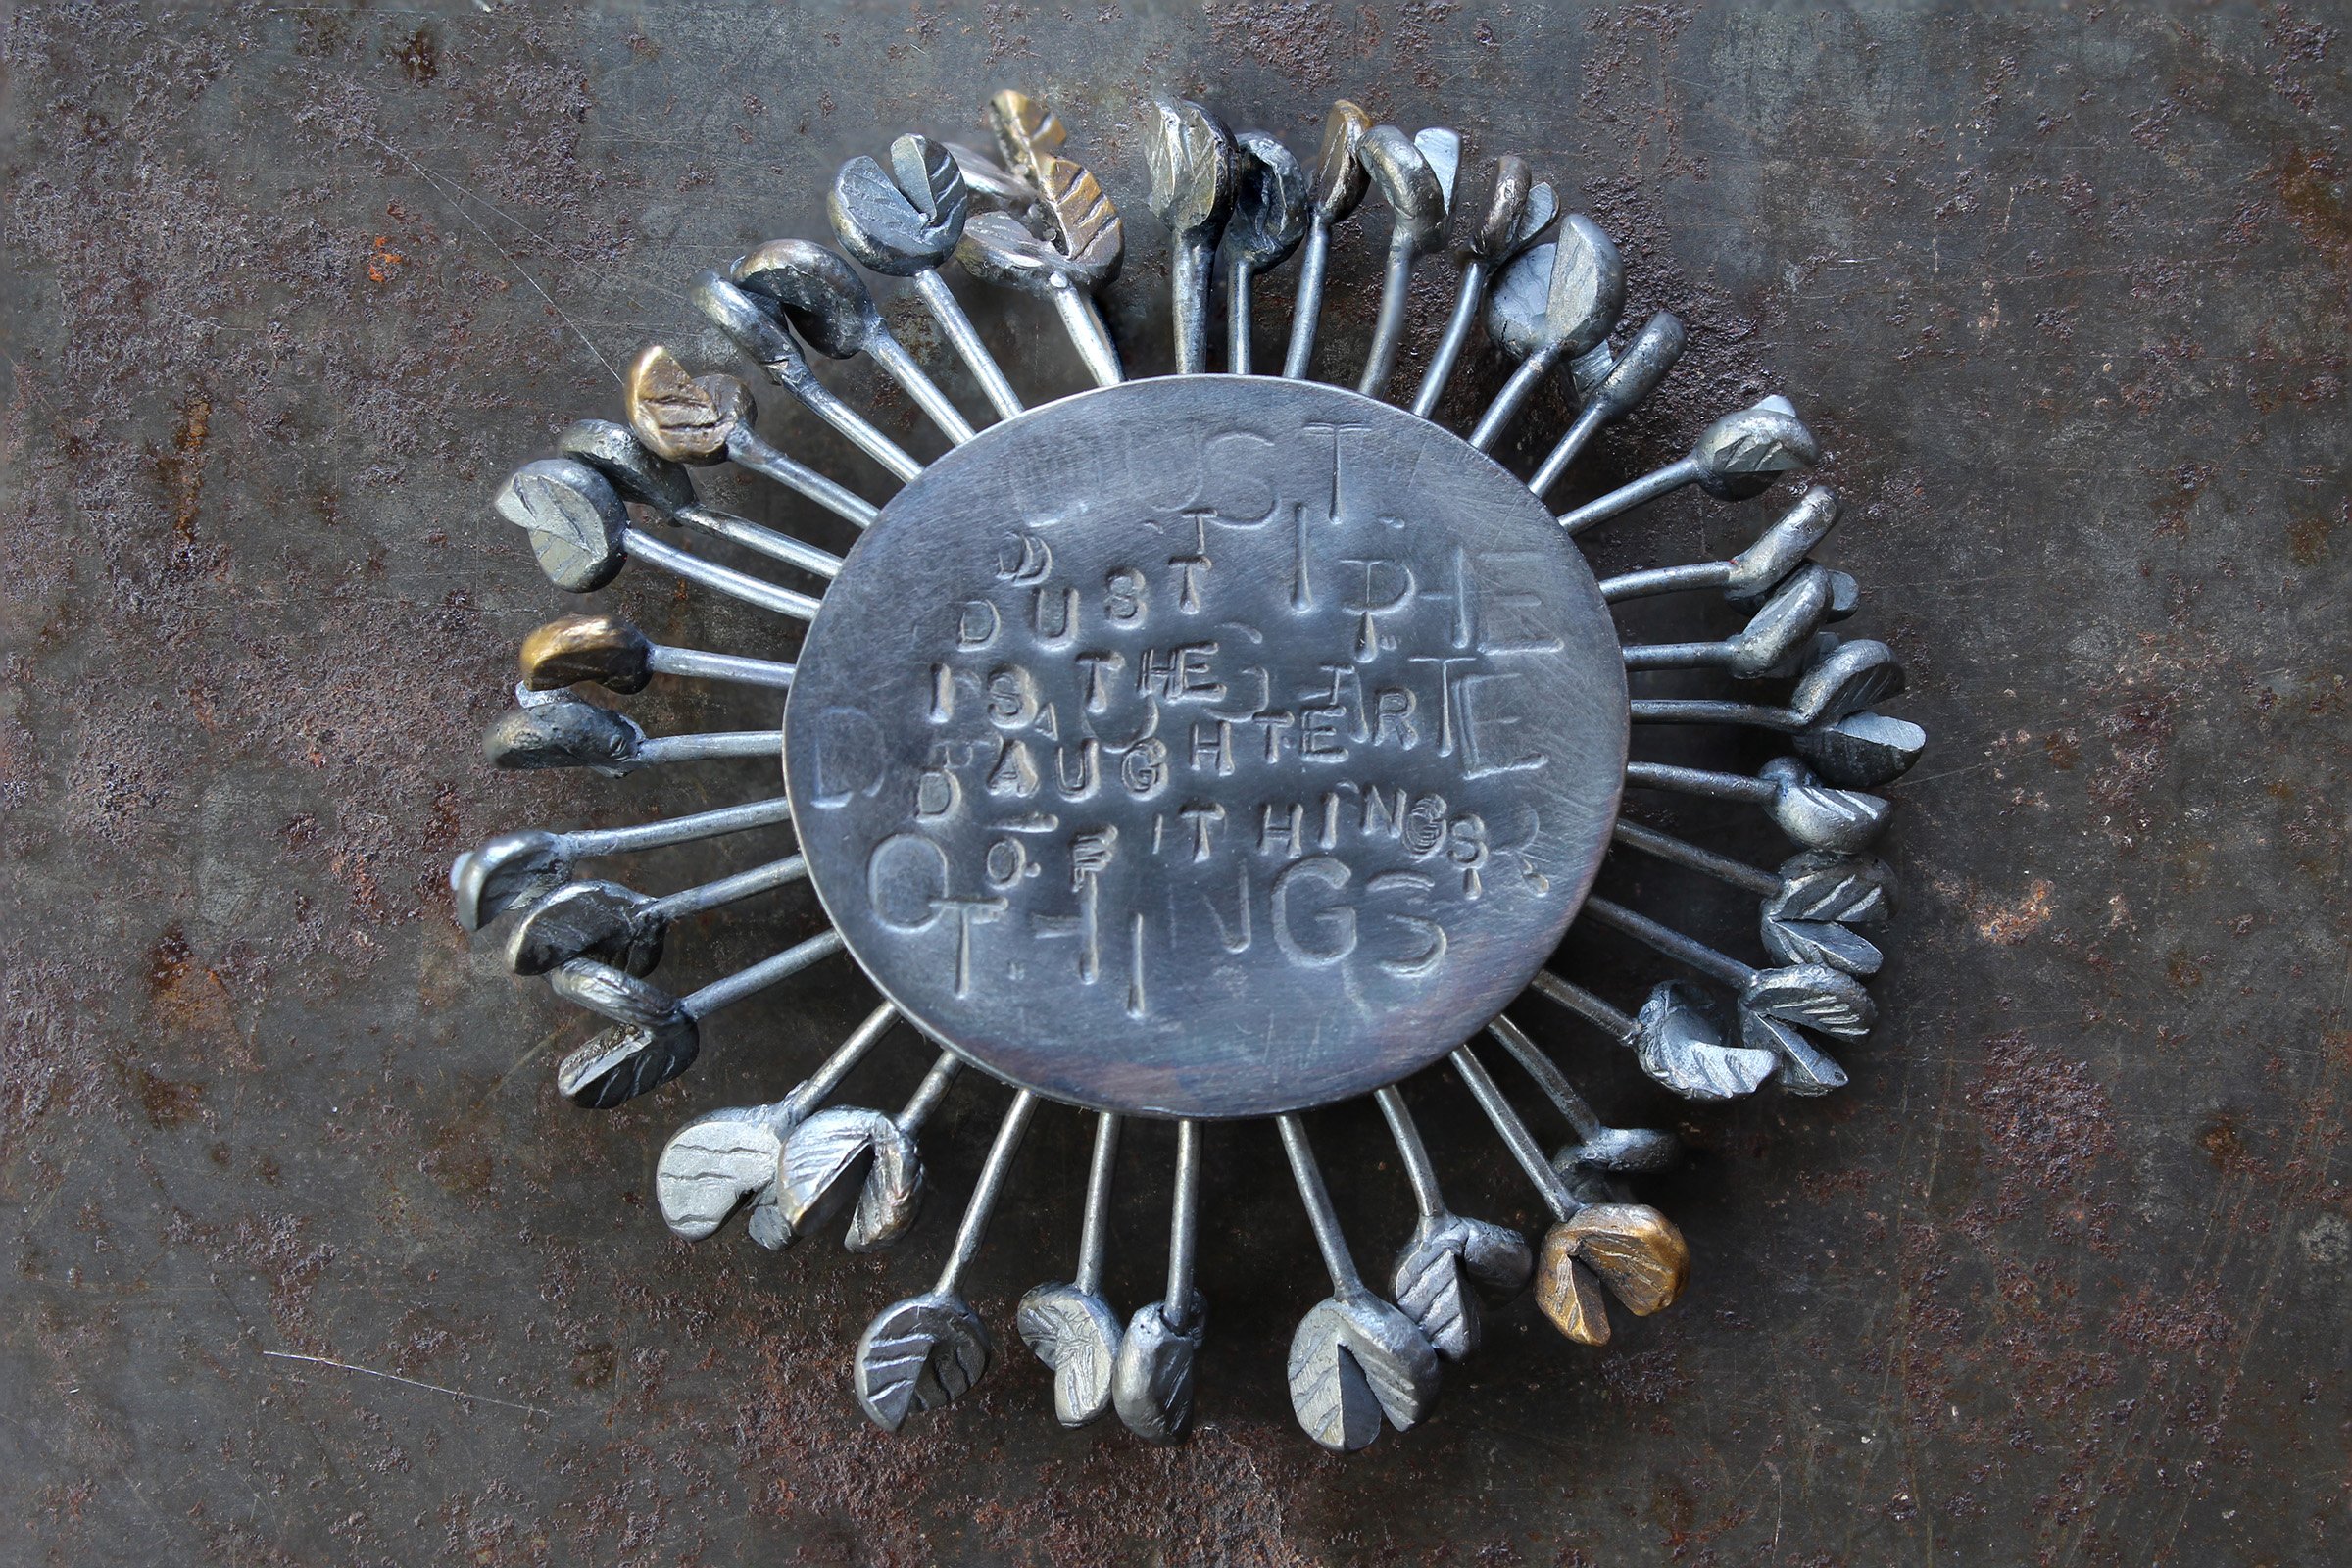 'Dust is the Daughter of Things' Brooch